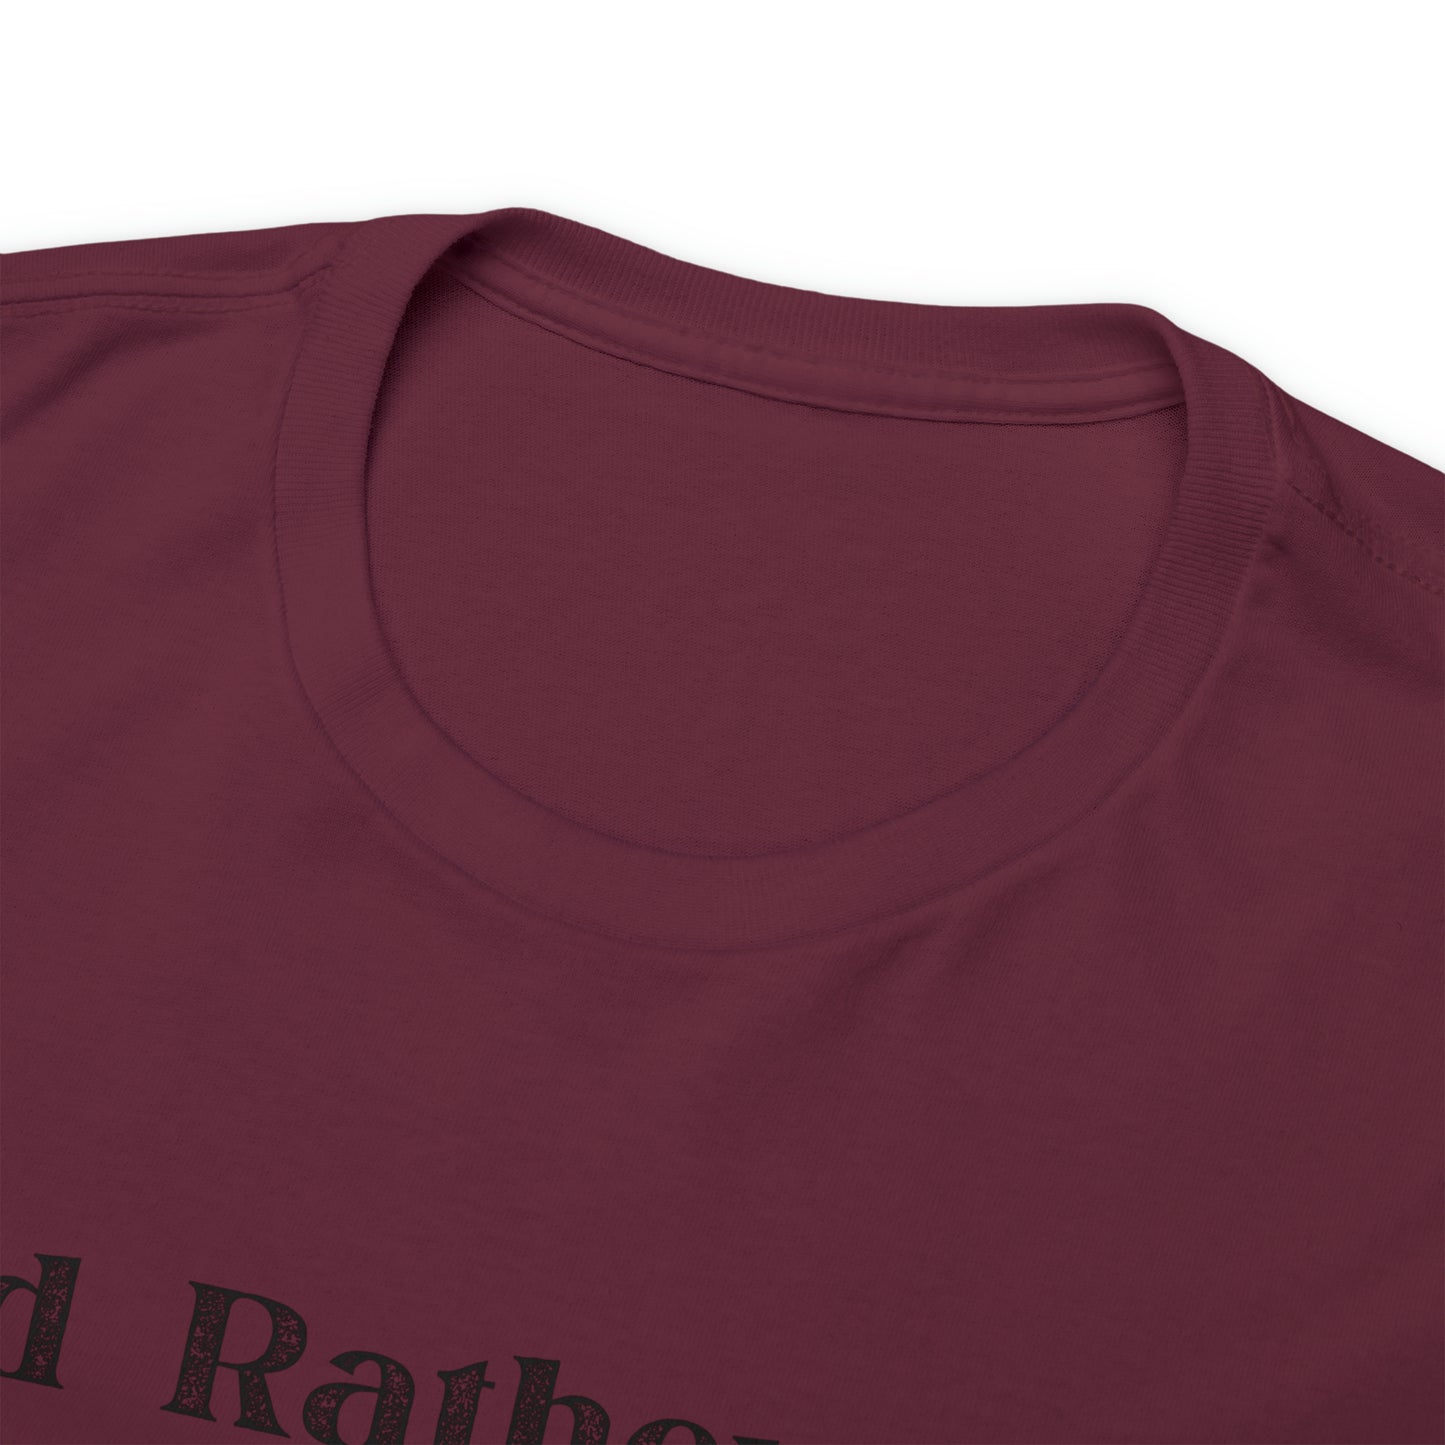 "Id Rather Be Fishing" T-Shirt - Weave Got Gifts - Unique Gifts You Won’t Find Anywhere Else!